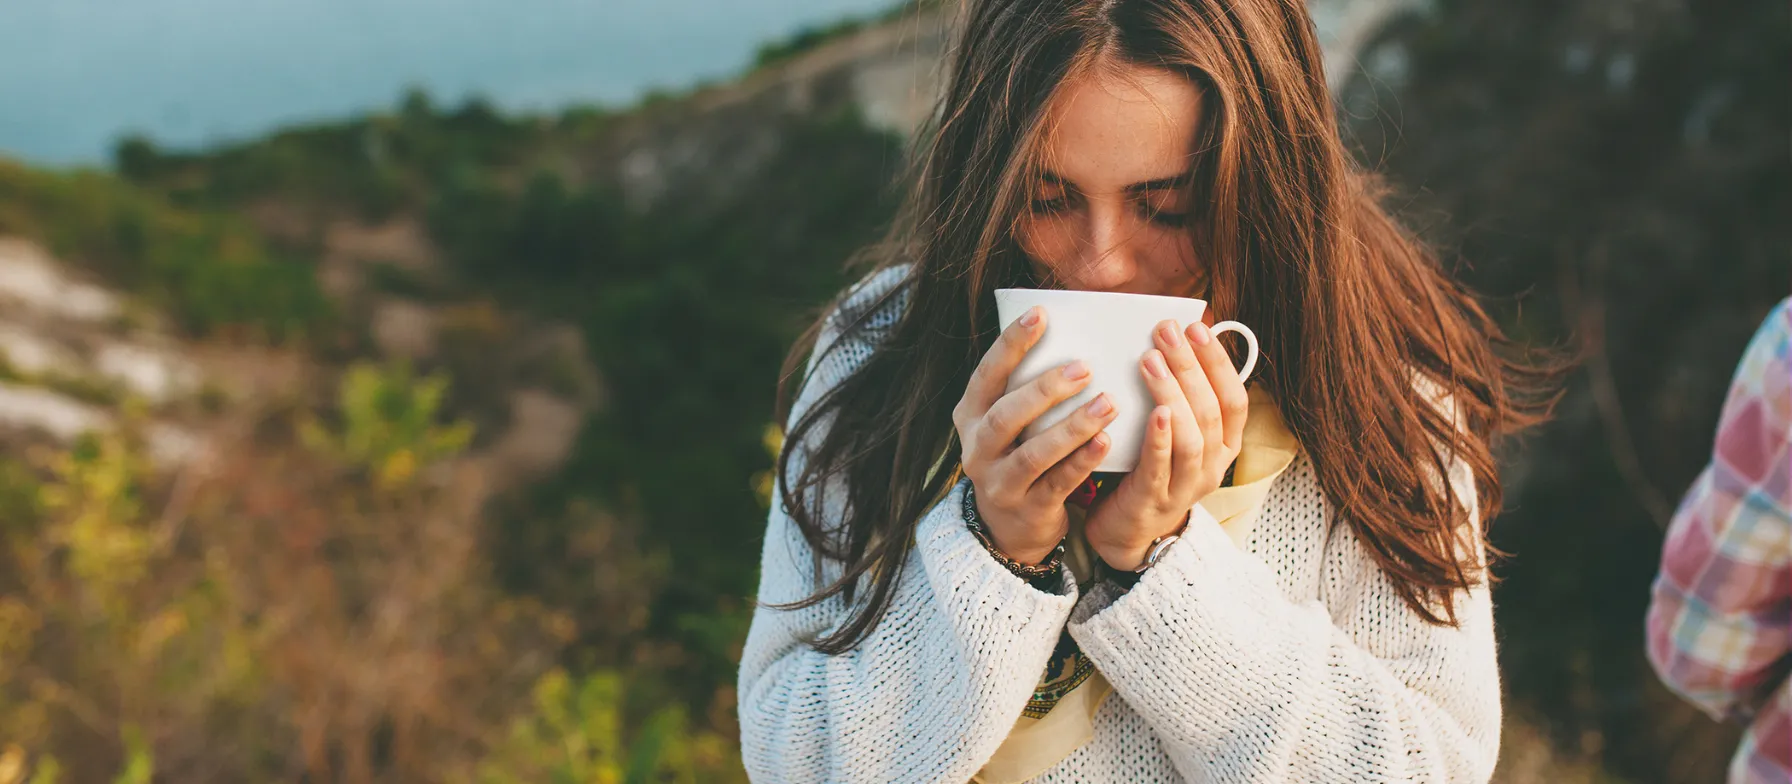 Staying Health While on the Road, girl drinking coffee